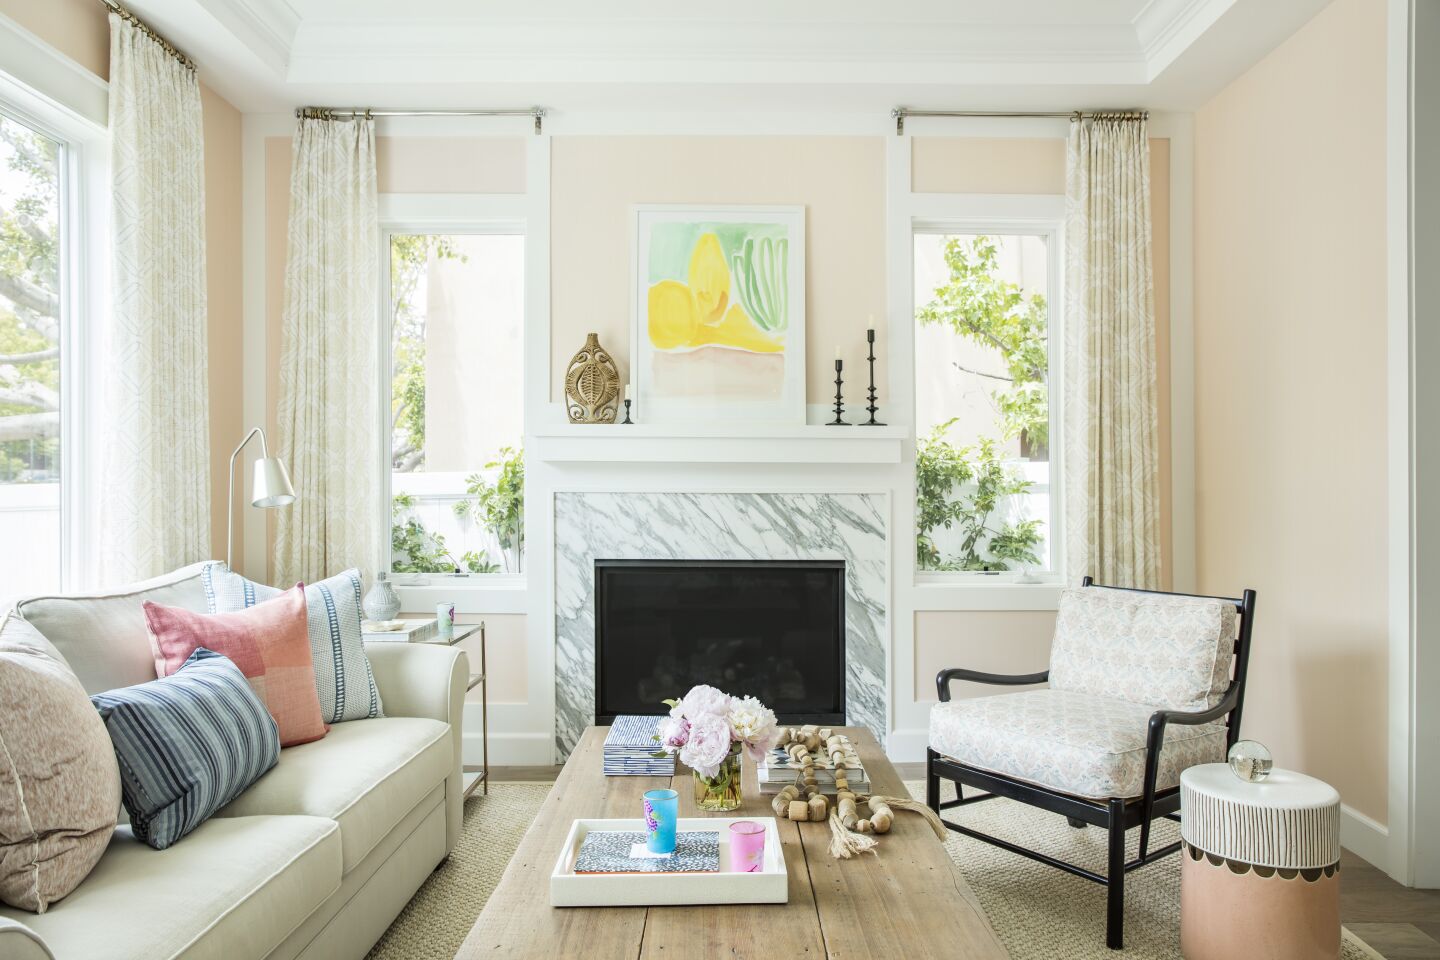 ... and after: Interior designer Christine Markatos Lowe painted the living room walls a dusty pink, added light-colored curtains in a geometric pattern and multicolored pillows, as well as furnishings to match the shade of Averyard's yellow Labrador, Indy.